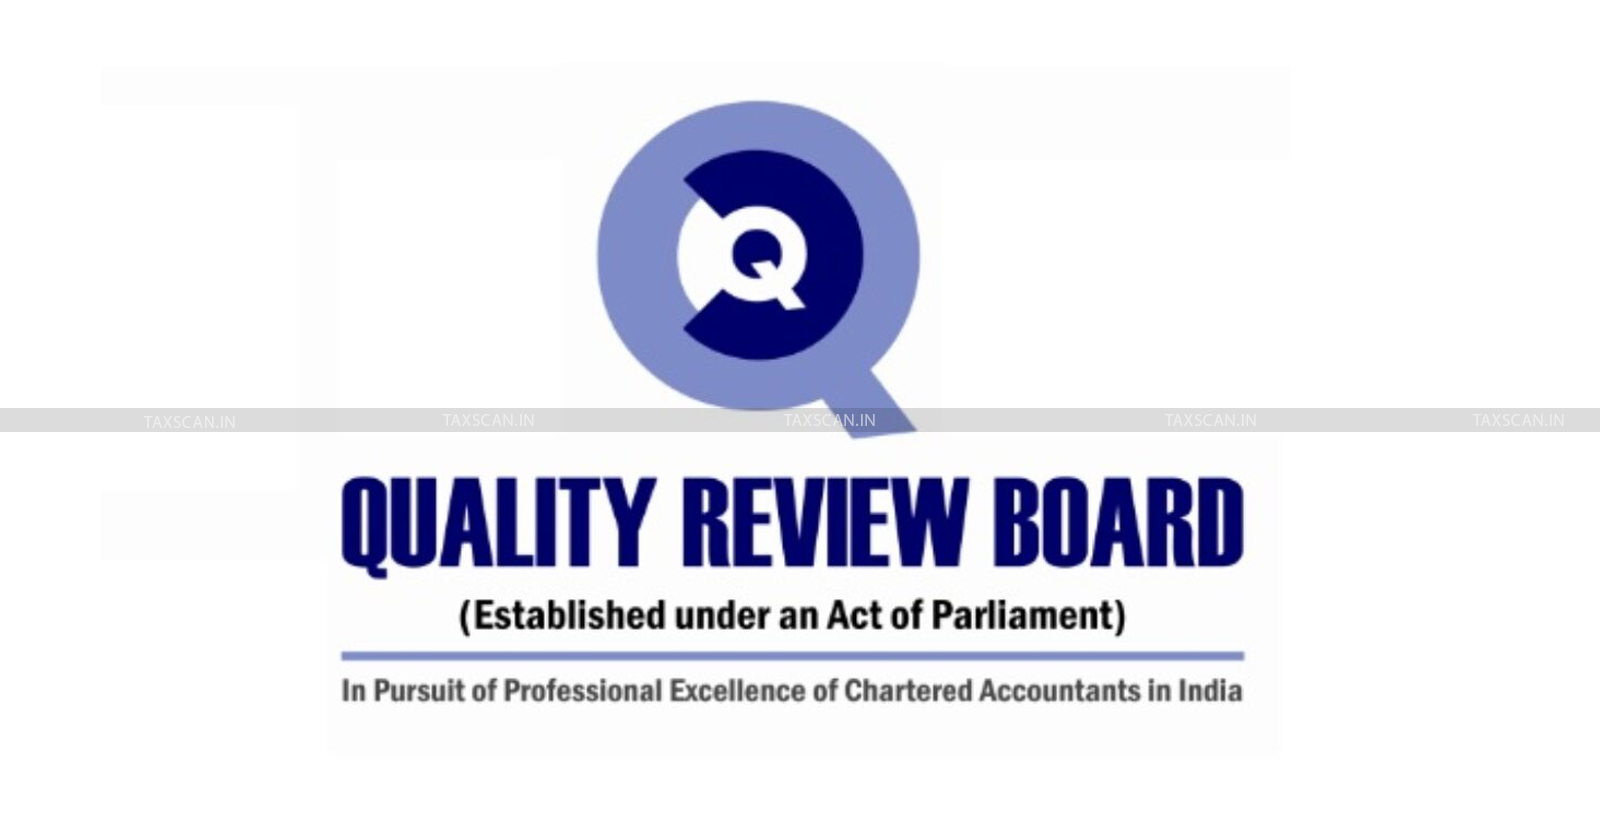 ICAI QRB - Quality Review Board - icai quality Review board - Non Compliances Guidance Note - taxscan